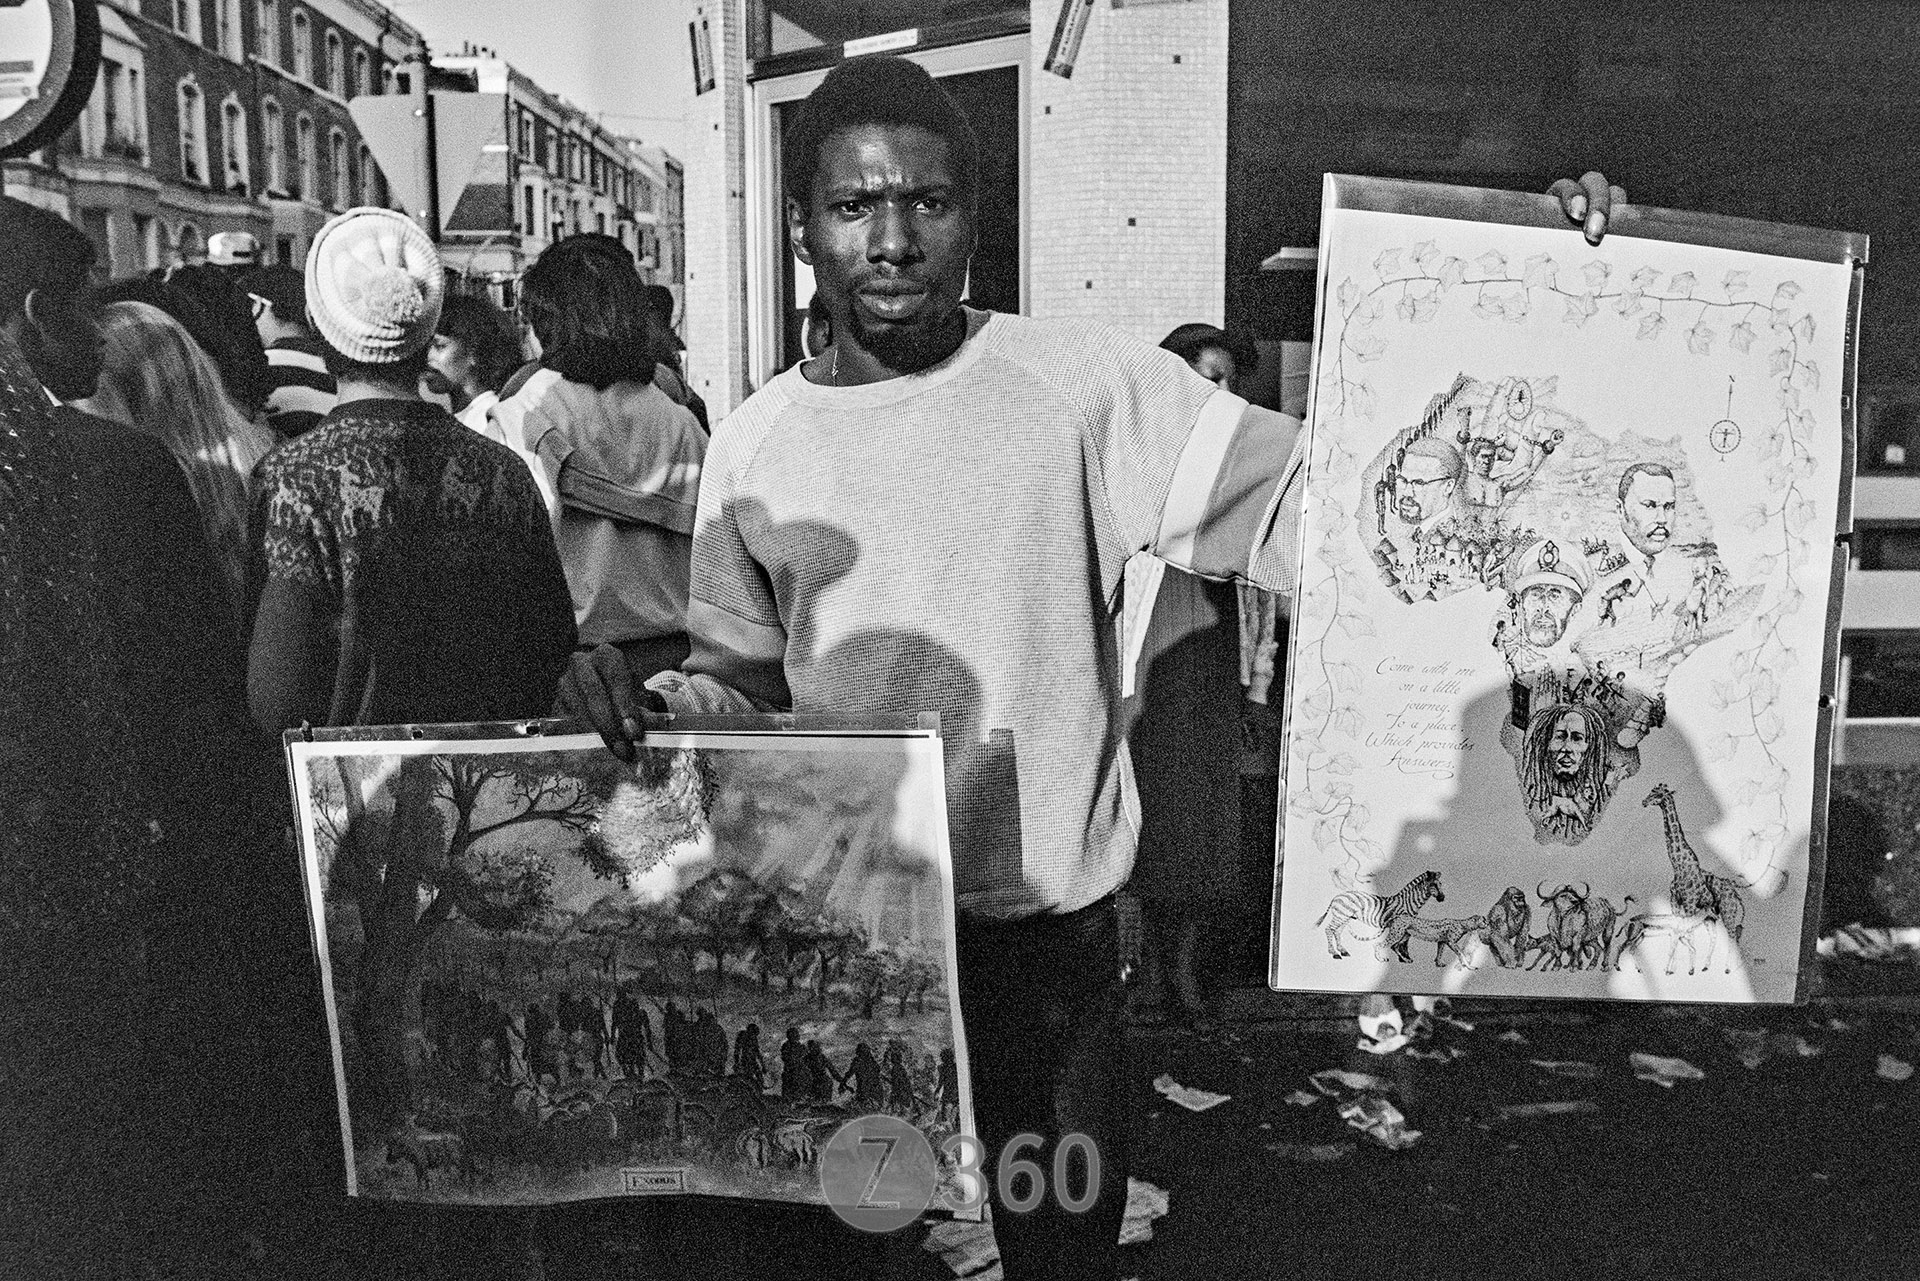 Notting Hill Carnival, London, August 1983